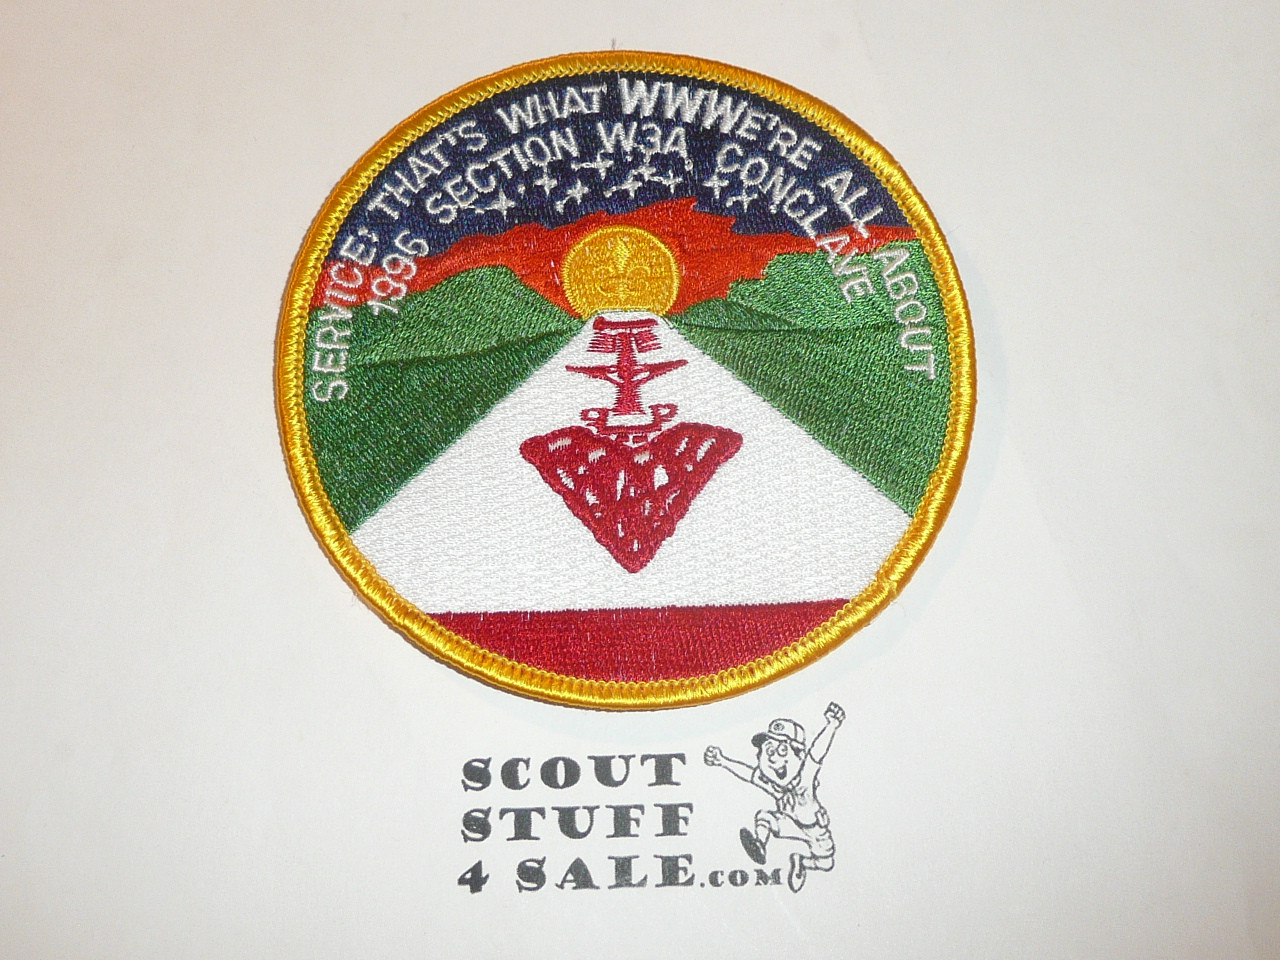 Section W3A 1996 O.A. Conclave STAFF Patch - Scout